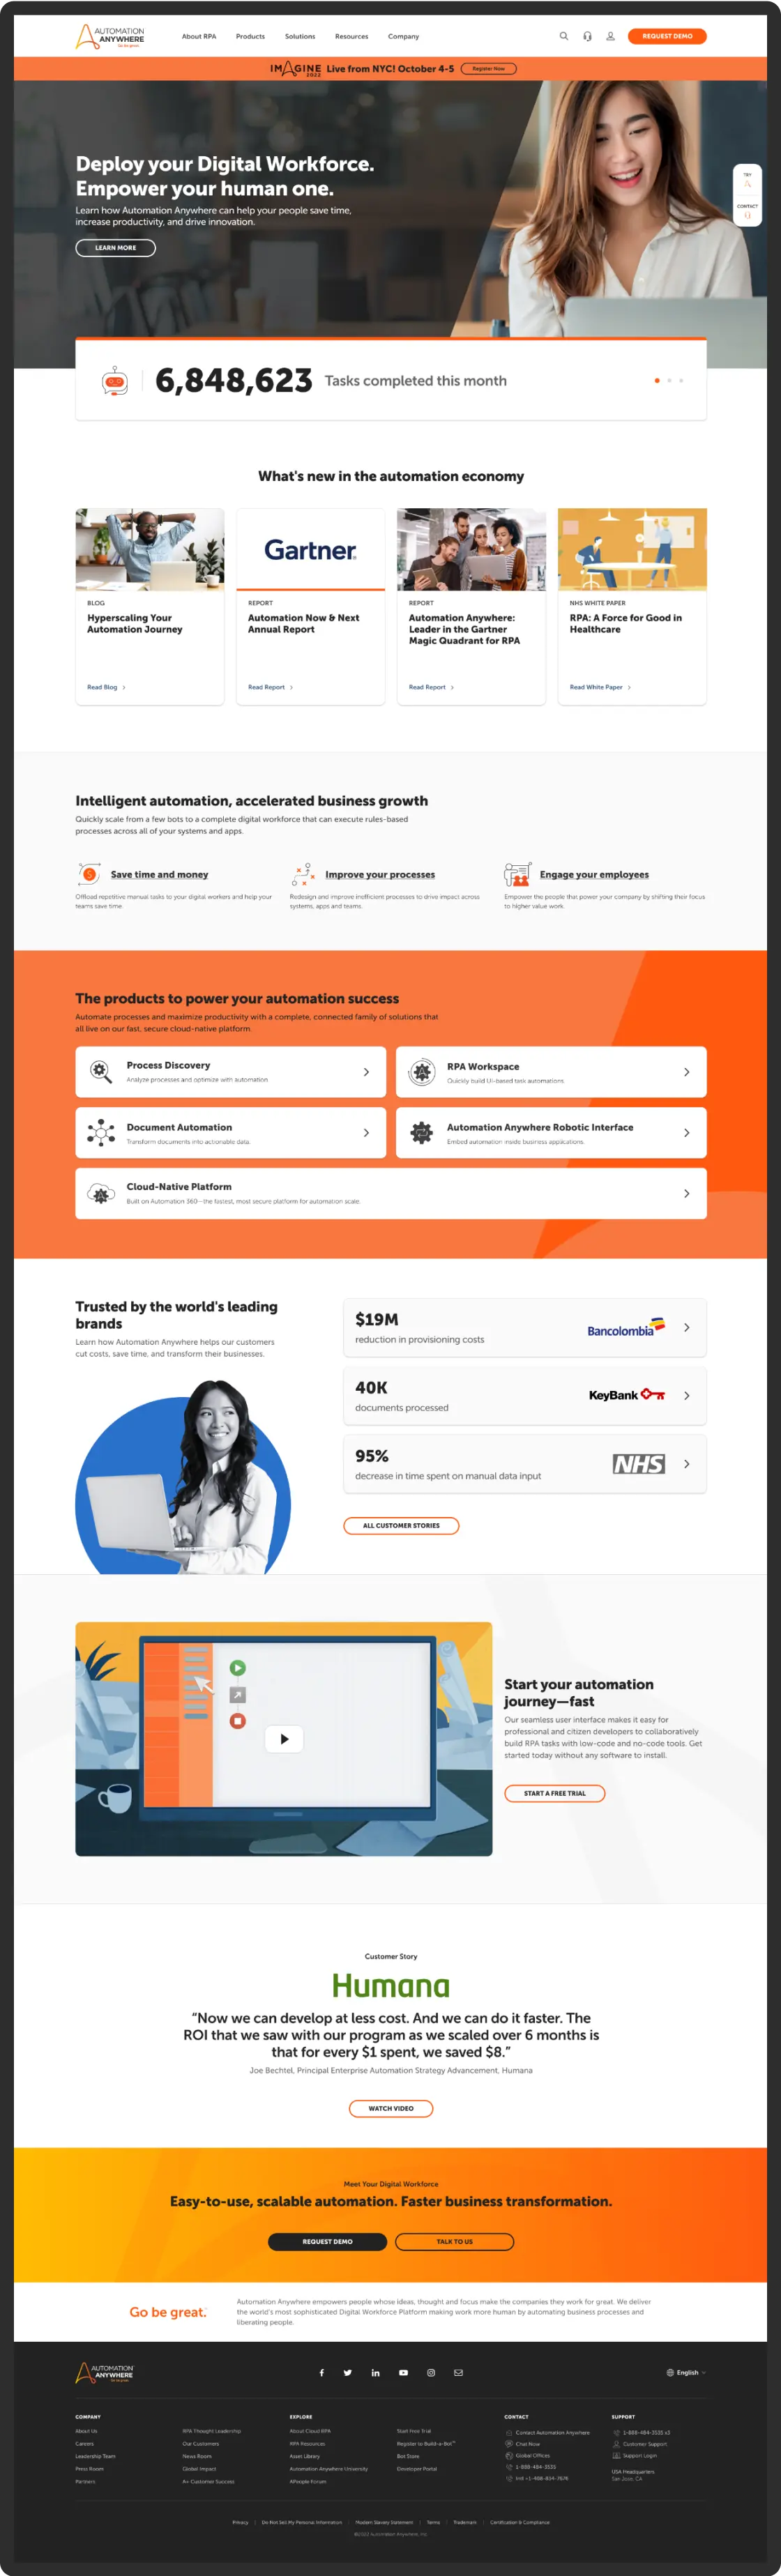 Full page screenshot of the redesigned Automation Anywhere home page